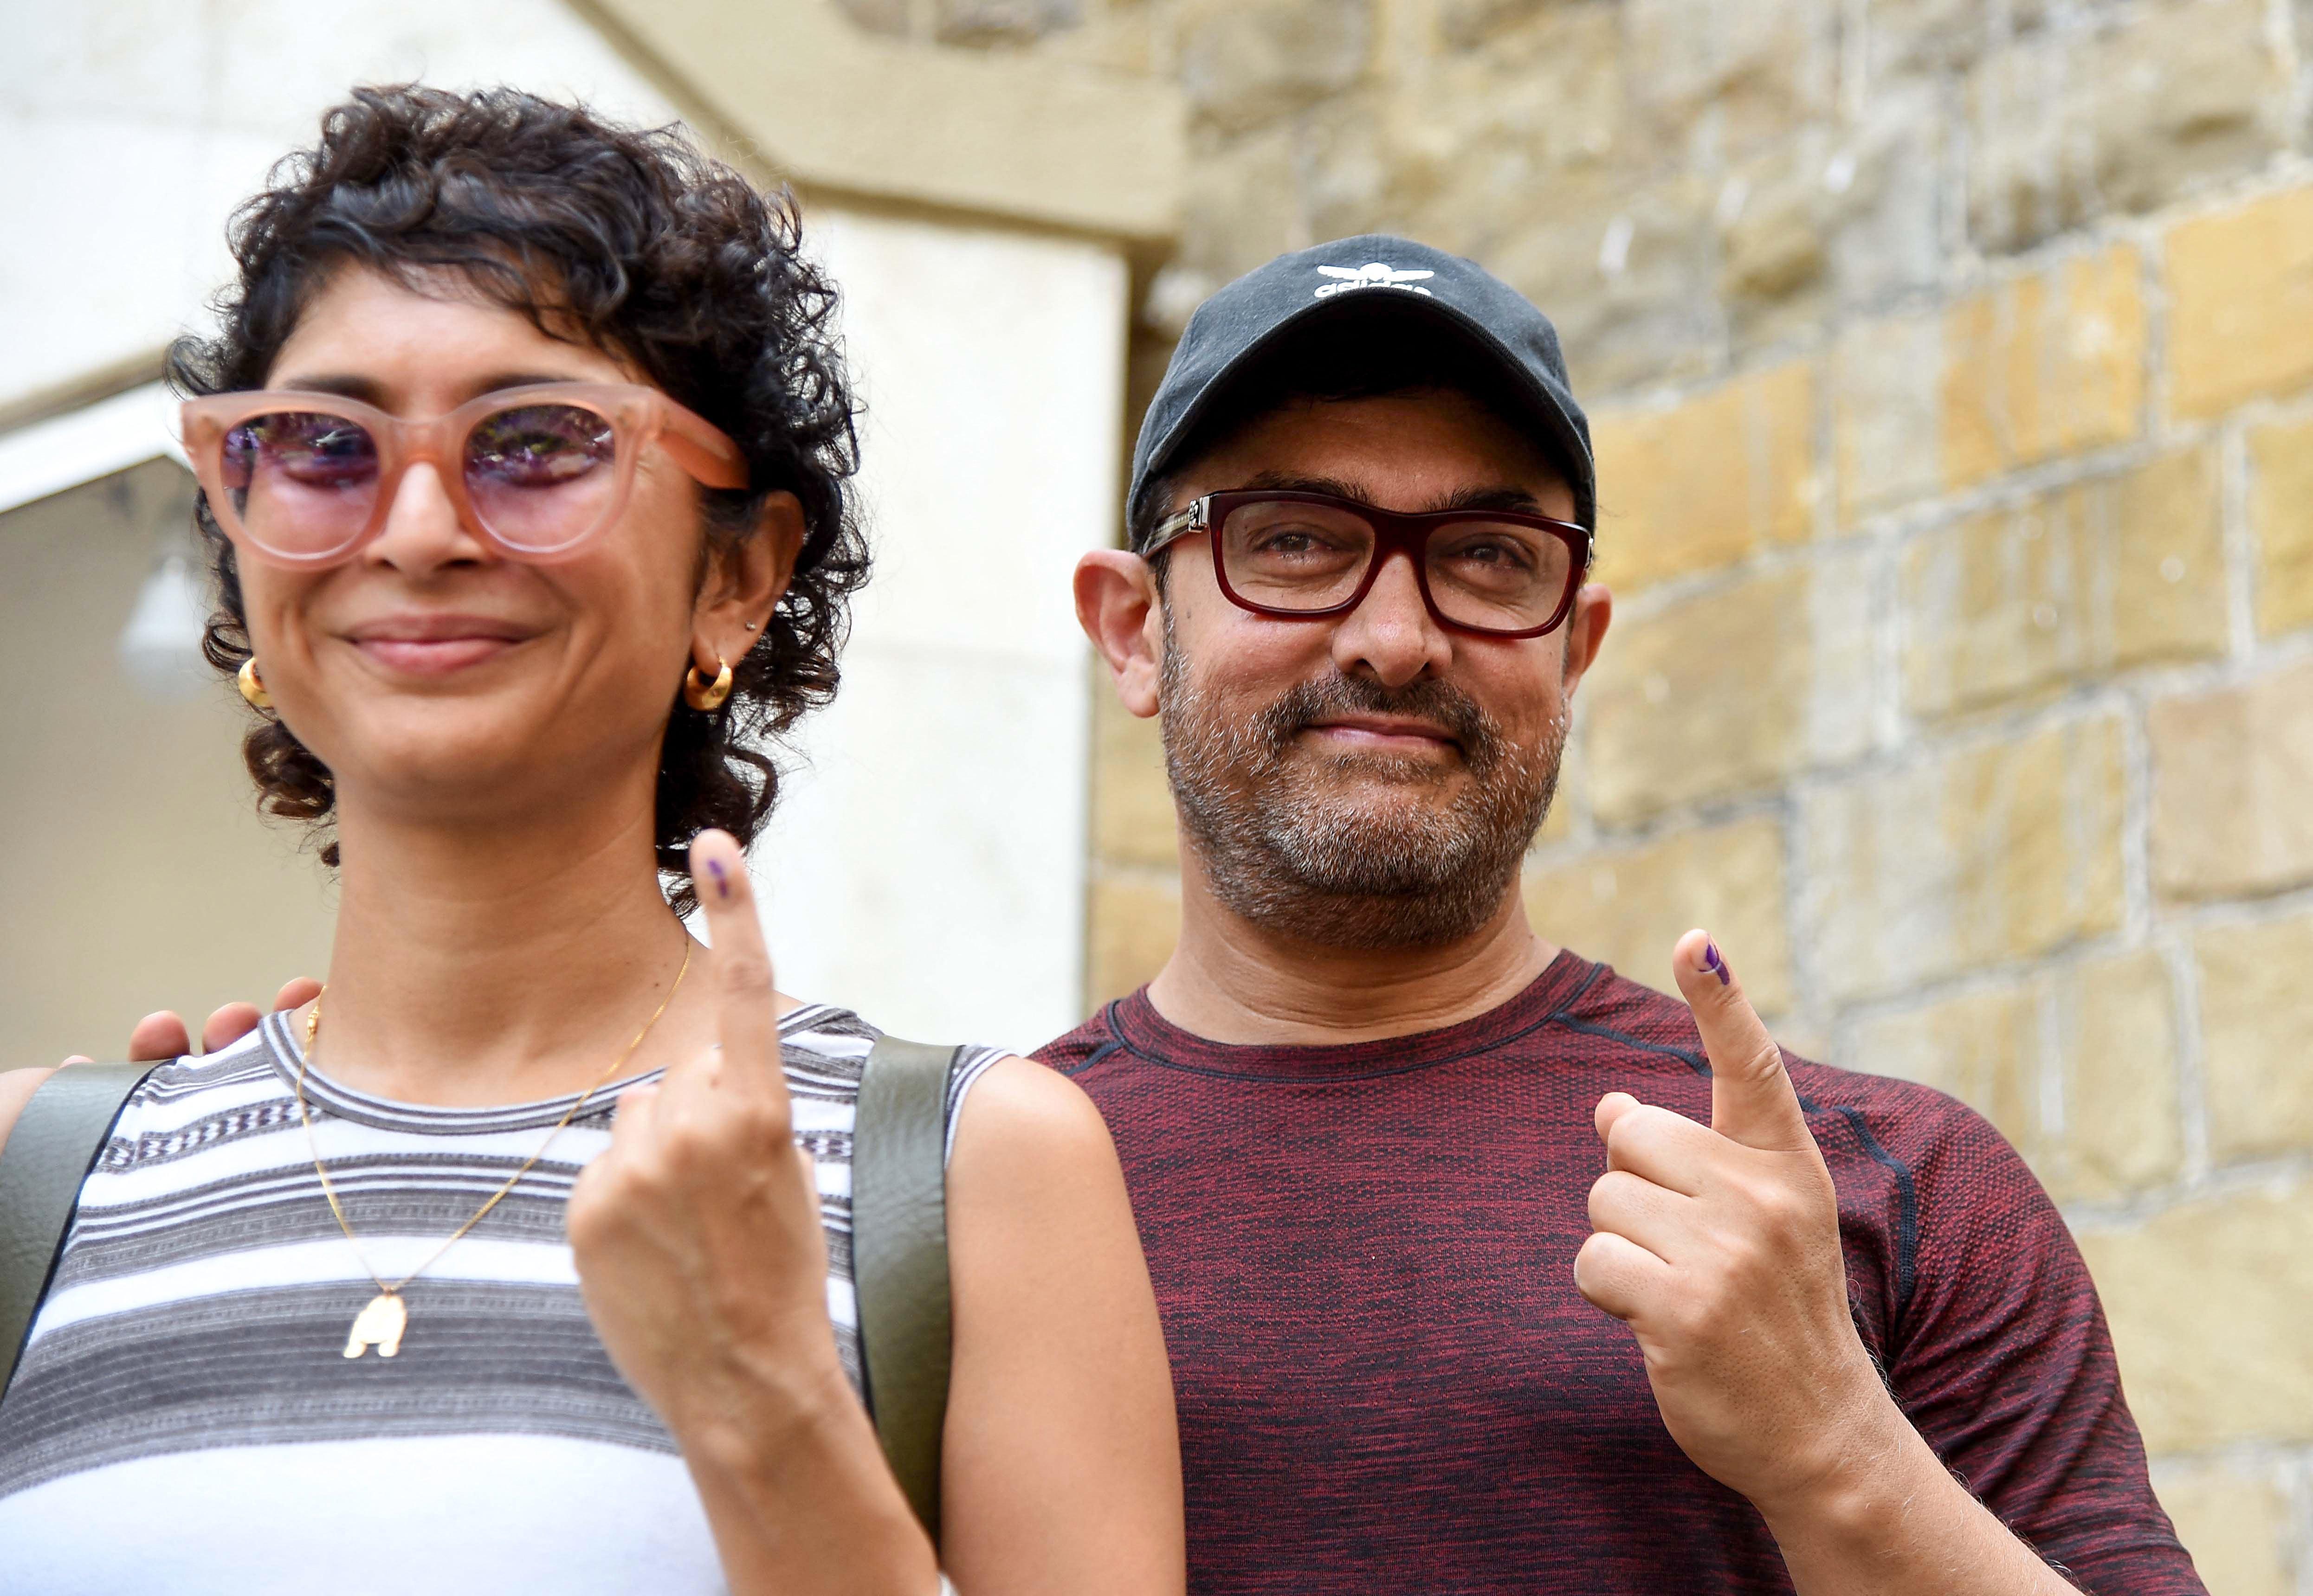 Indian Bollywood actor Aamir Khan (R) along with his wife and film director Kiran Rao (L) after casting their vote in Mumbai on April 29, 2019